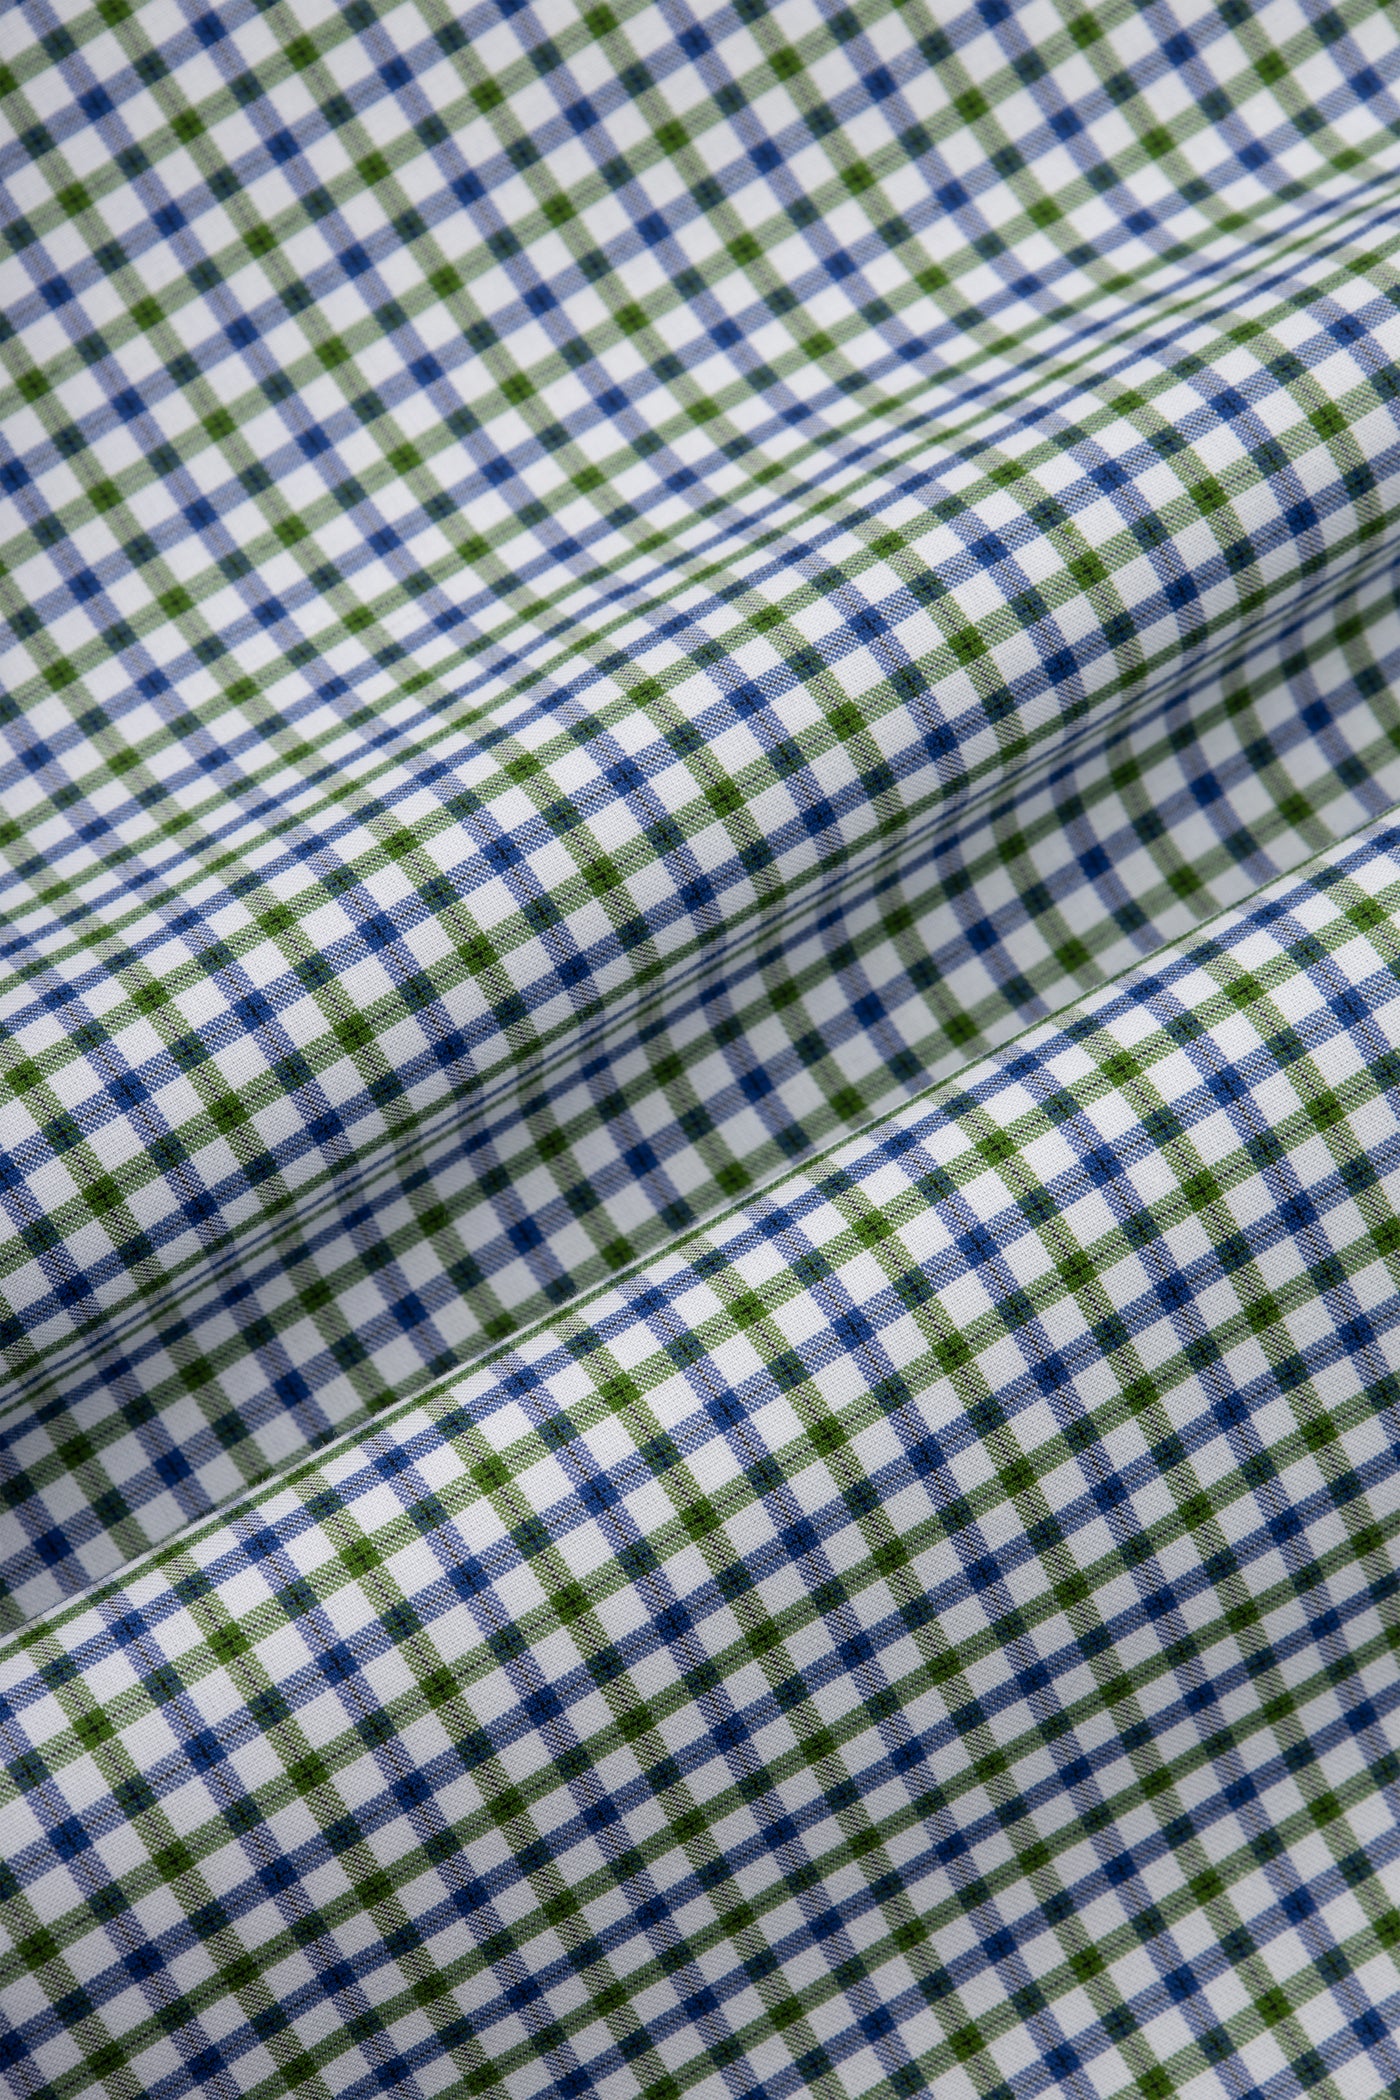 Checked White & Light Green Smart Casual Shirt